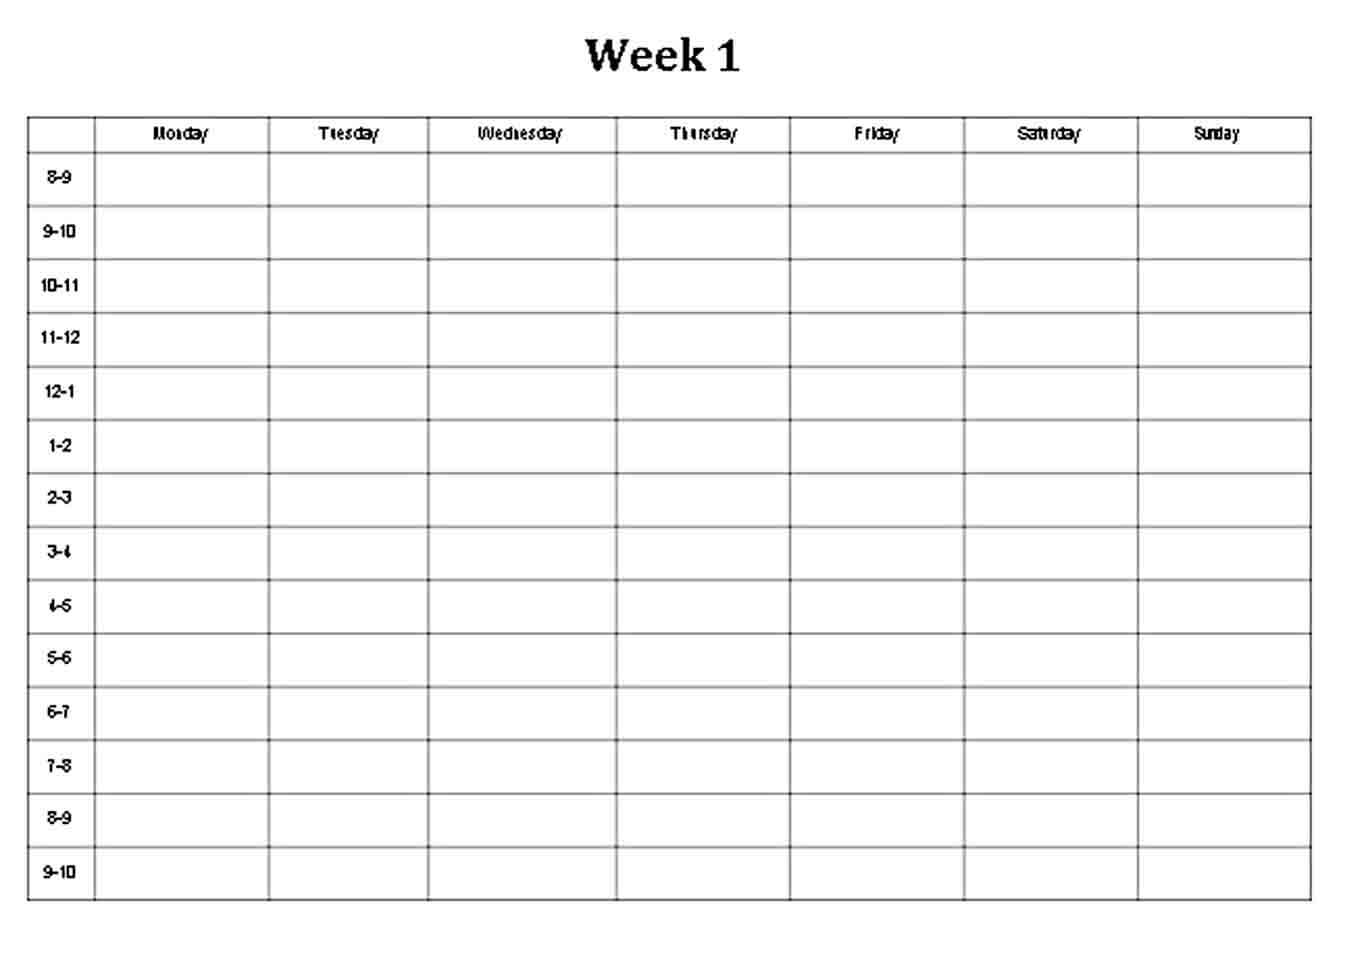 Weekly Study Schedule Template PDF Format Download